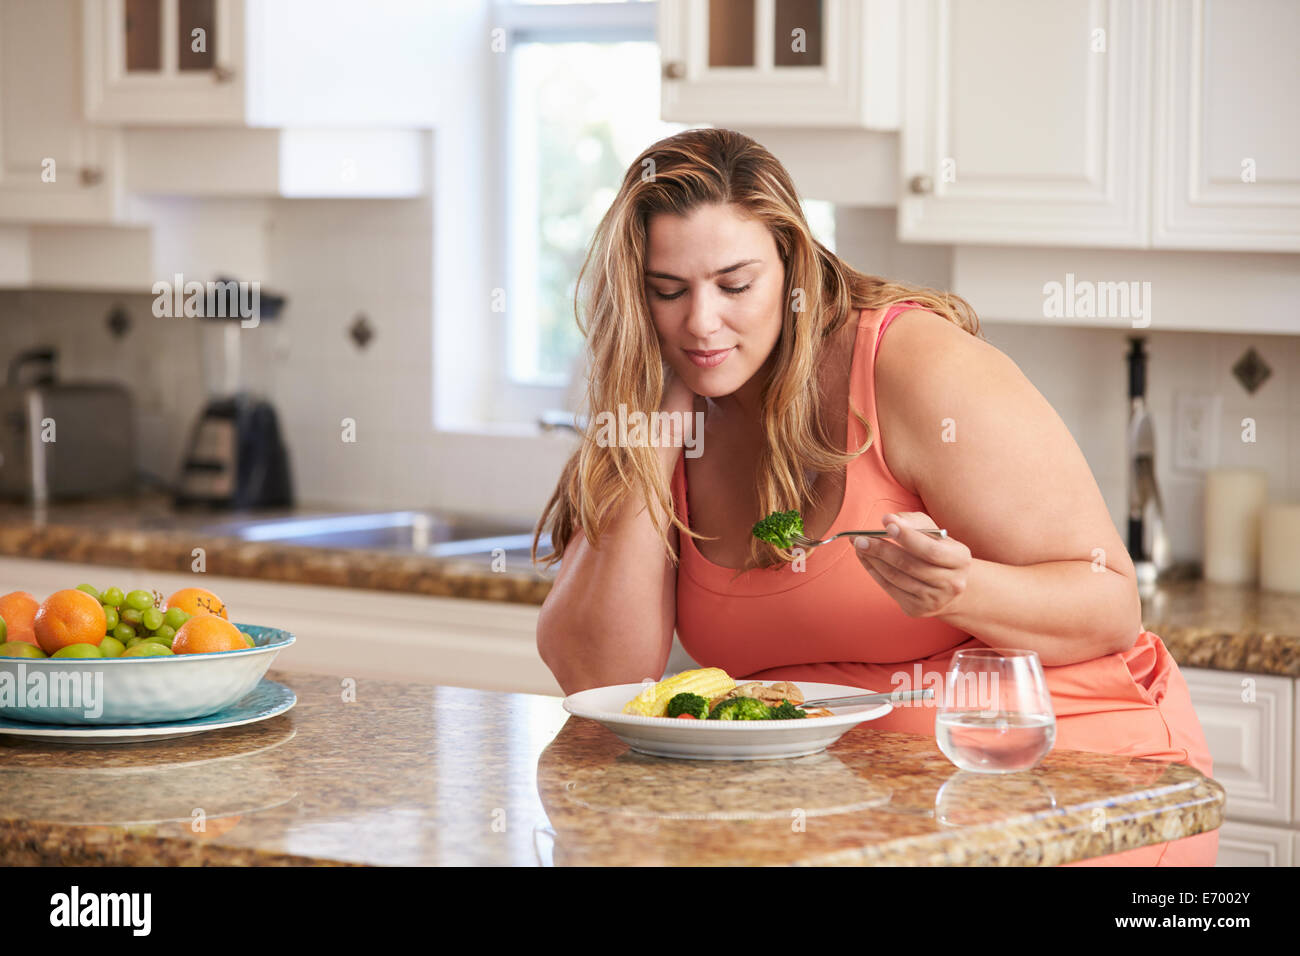 Overweight Woman Eating Healthy Meal In Kitchen Stock Photo